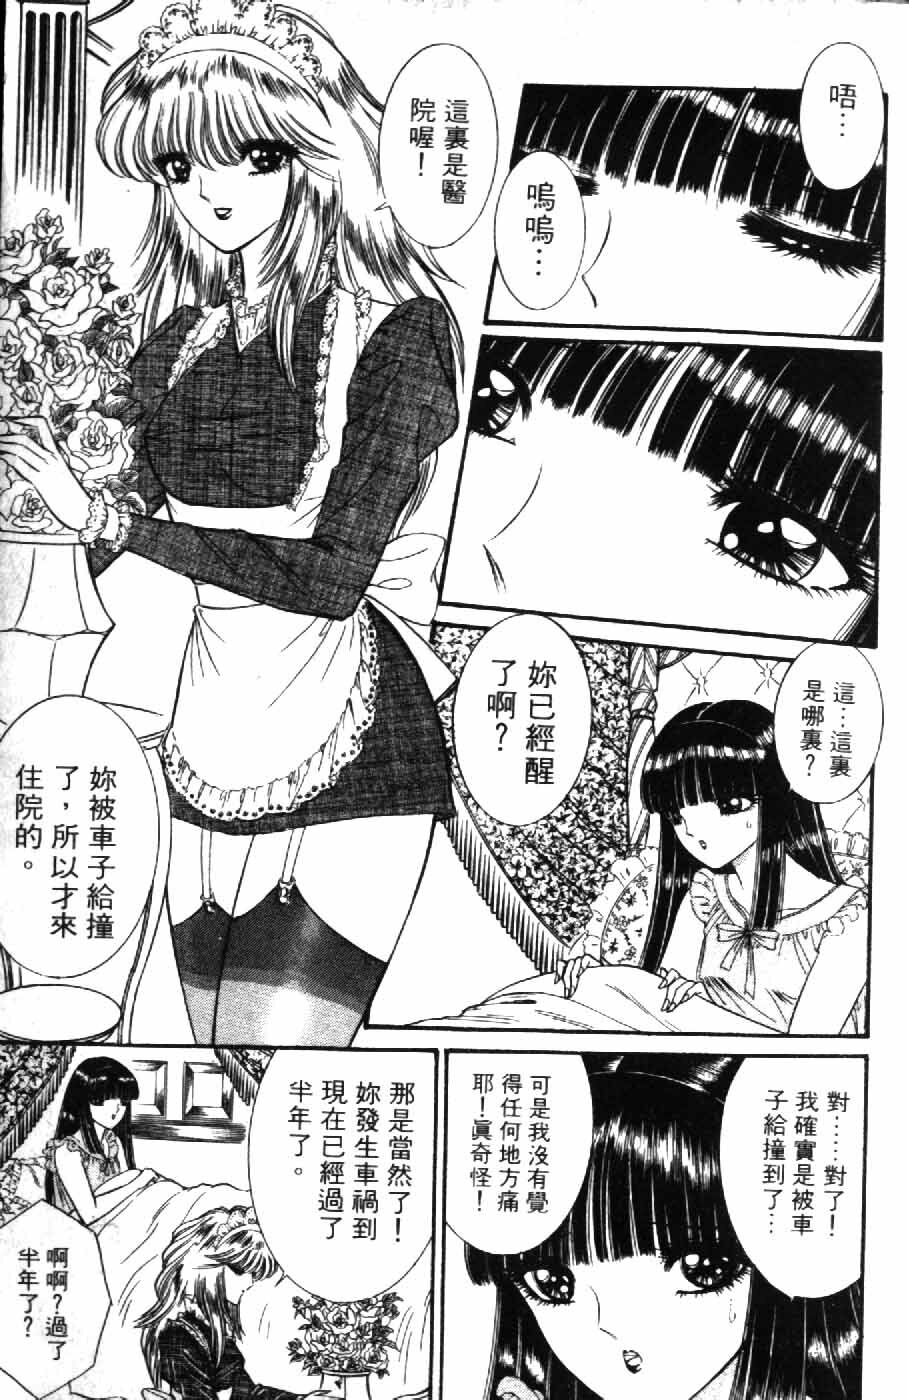 [Senno Knife] Ouma ga Horror Show 1 - Trans Sexual Special Show 1 | 顫慄博覽會 1 [Chinese] page 7 full